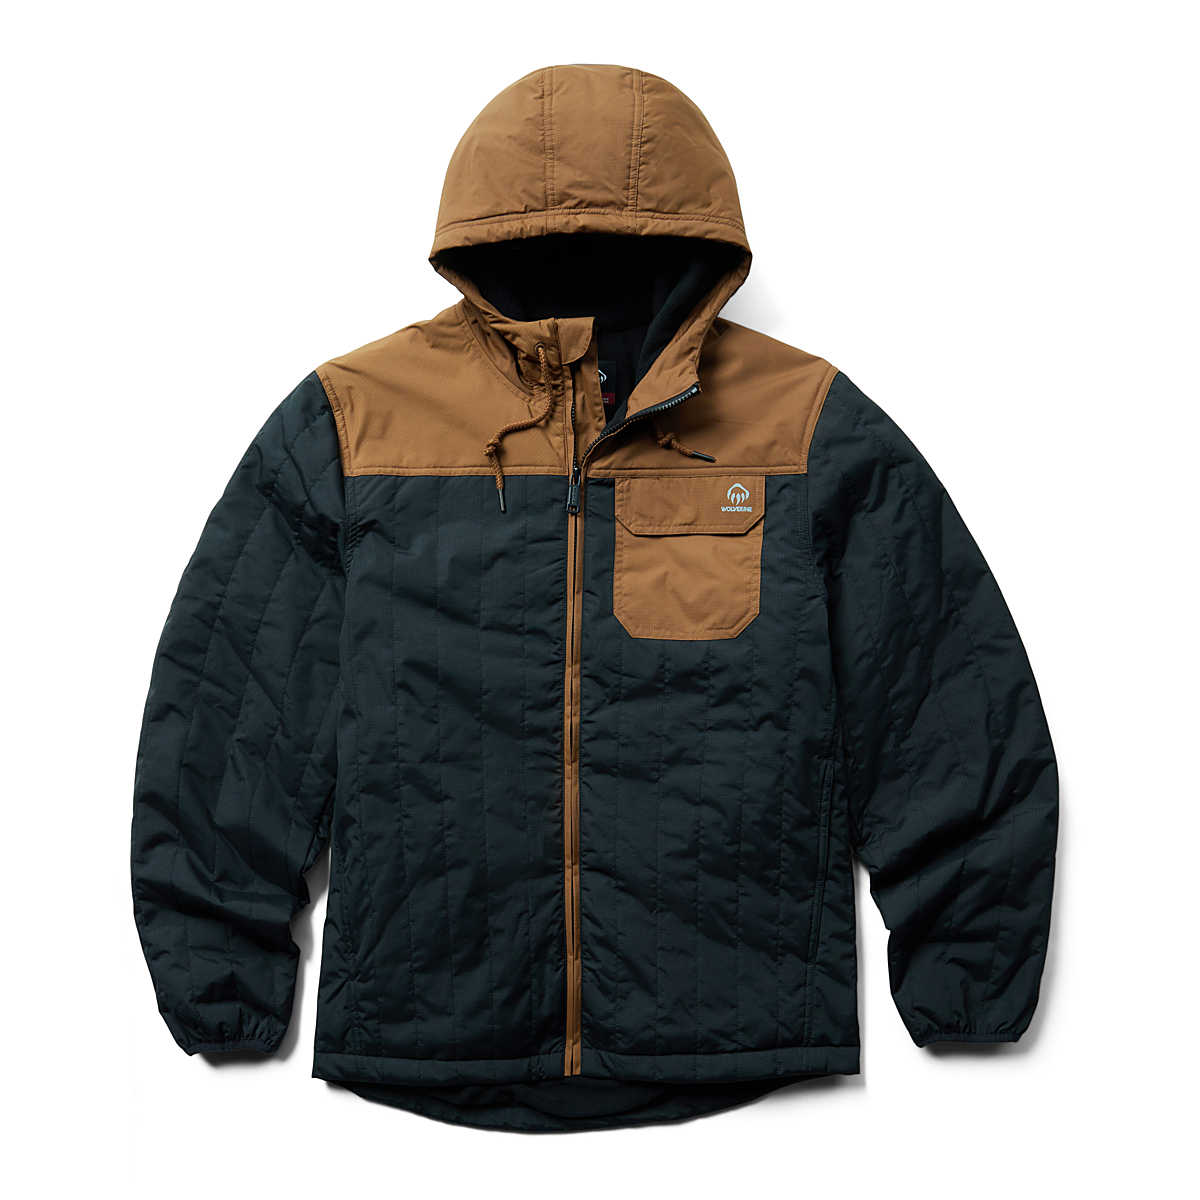 Wolverine Men's I-90 Insulated Hooded Jacket (Black) $38 + Free Shipping on orders $75+